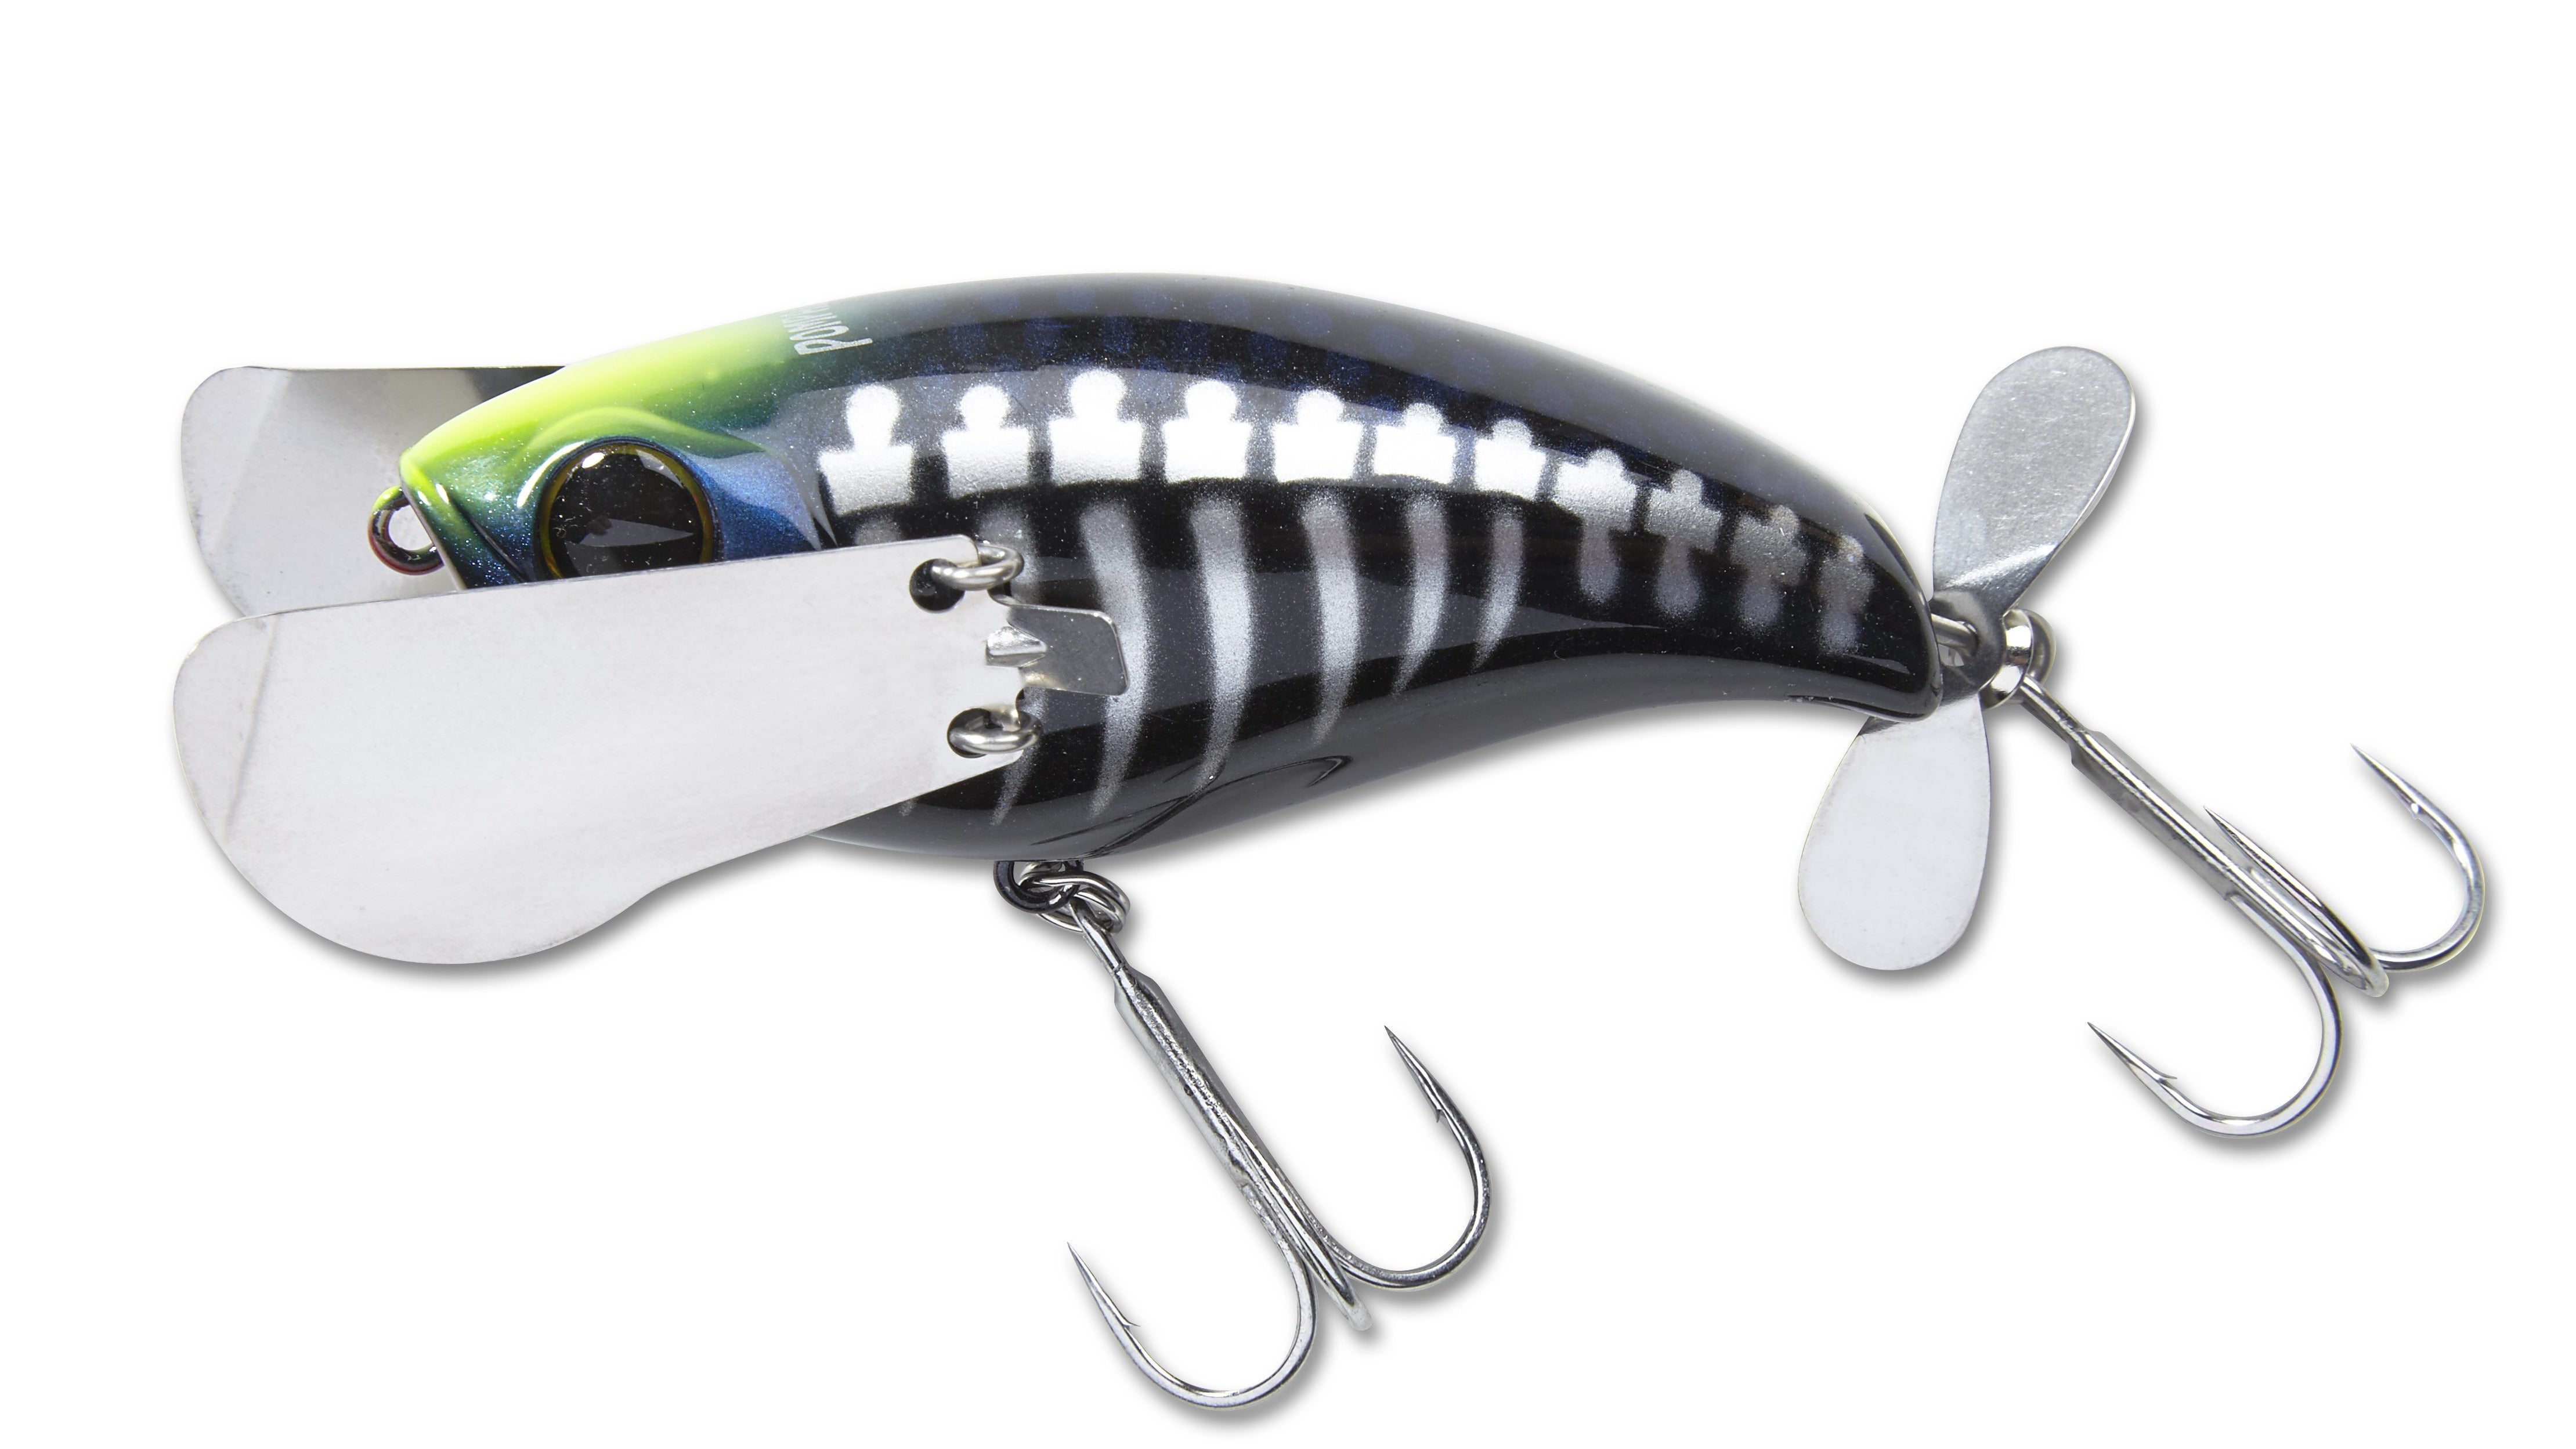 Jackall Pompadour Topwater Lure Review - Tackle Test